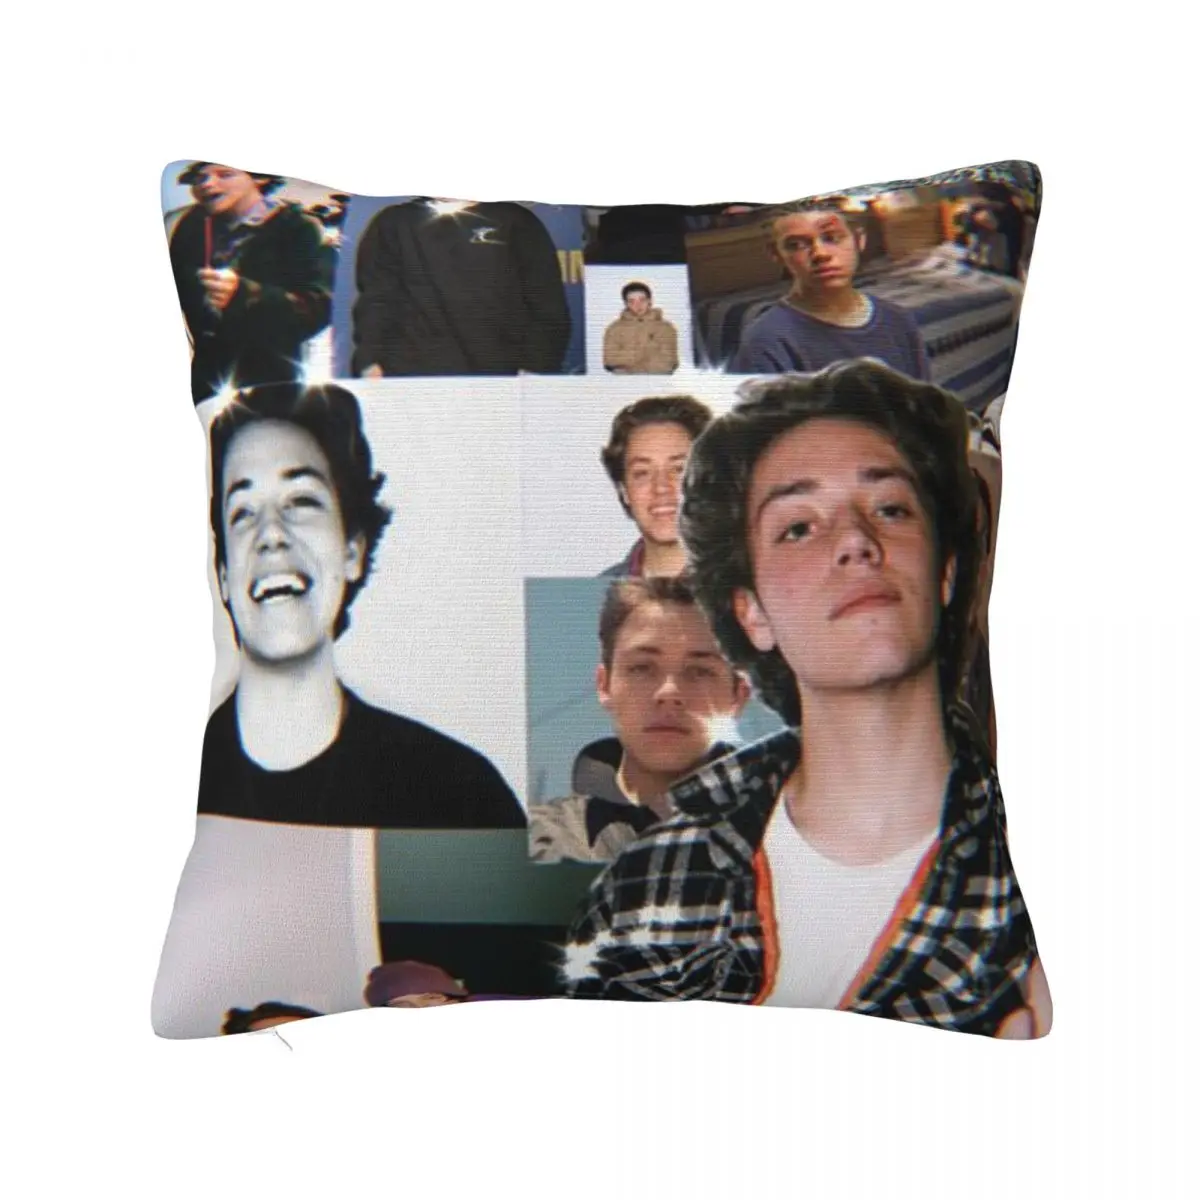 

ethan cutkosky Throw Pillow Rectangular Cushion Cover Couch Cushions luxury throw pillow covers Christmas Throw Pillows Covers